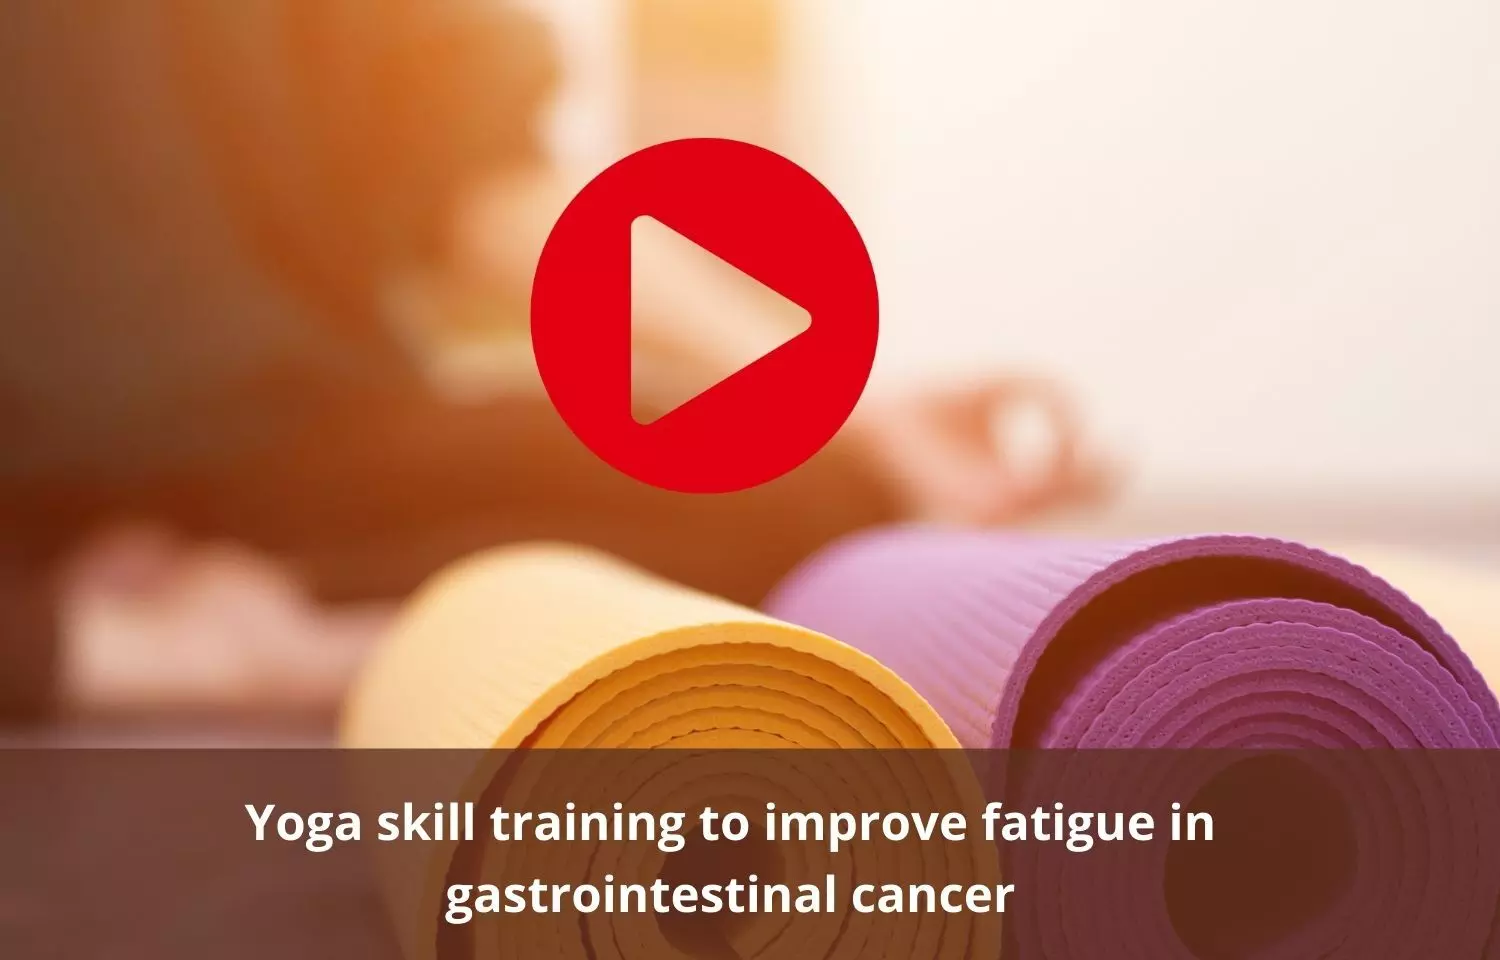 Yoga effective in improving fatigue in gastrointestinal cancer